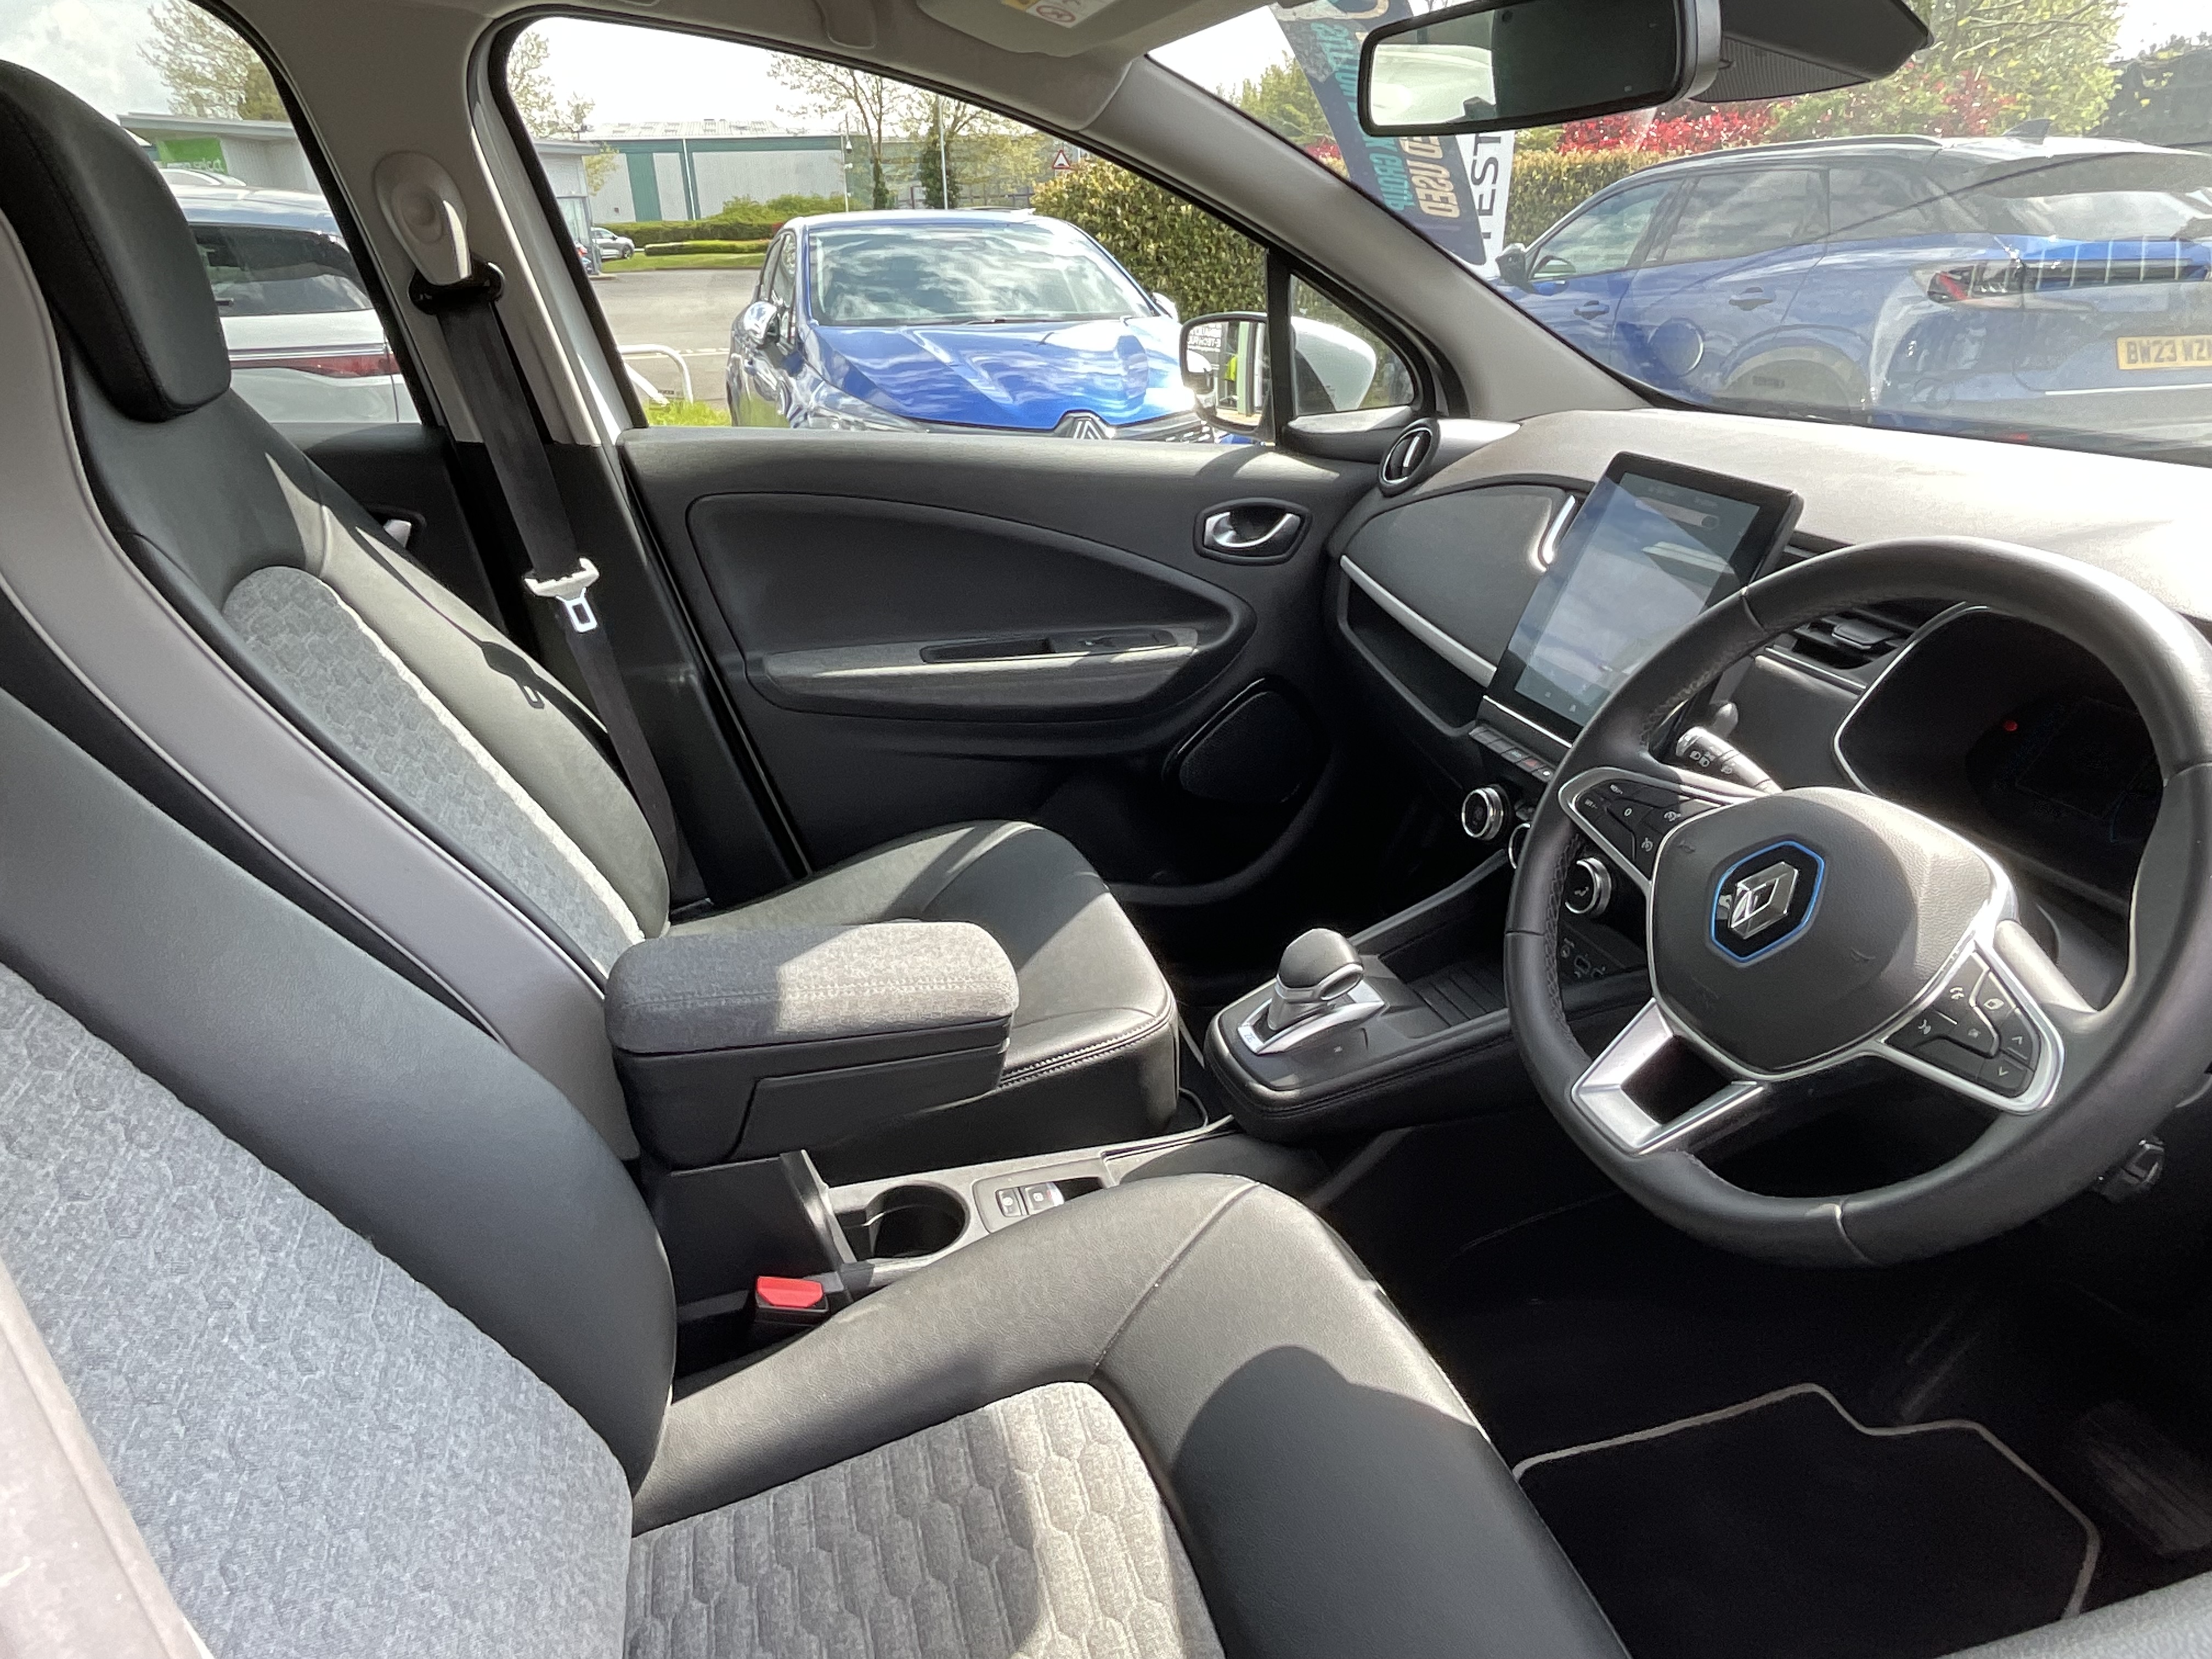 Renault Zoe 100kW i GT Line R135 50kWh Rapid Charge 5dr Auto